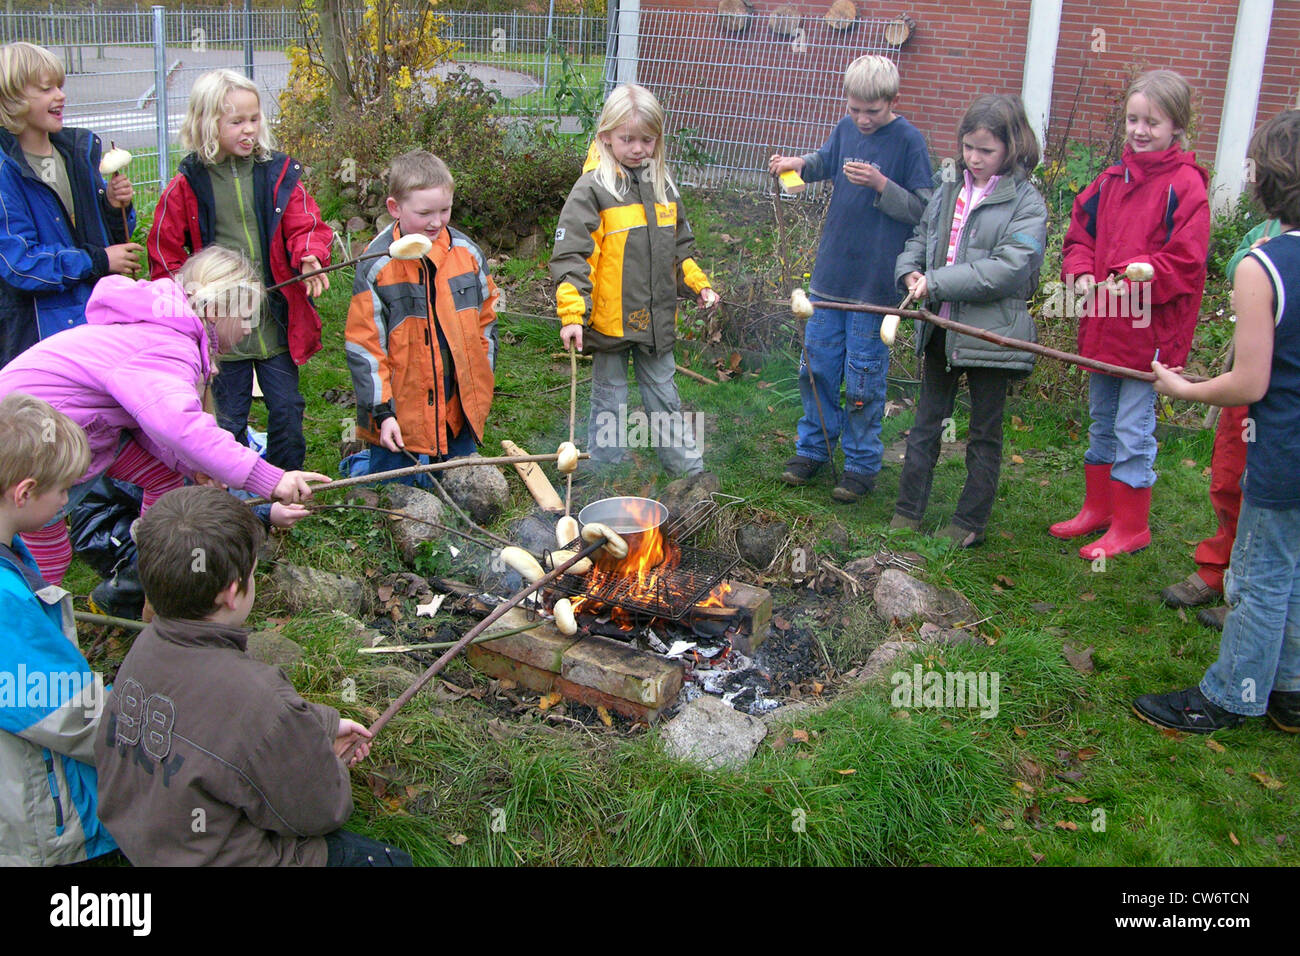 primary school children at a campfire roasting bread rolls on sticks and cooking water for tea, Germany Stock Photo